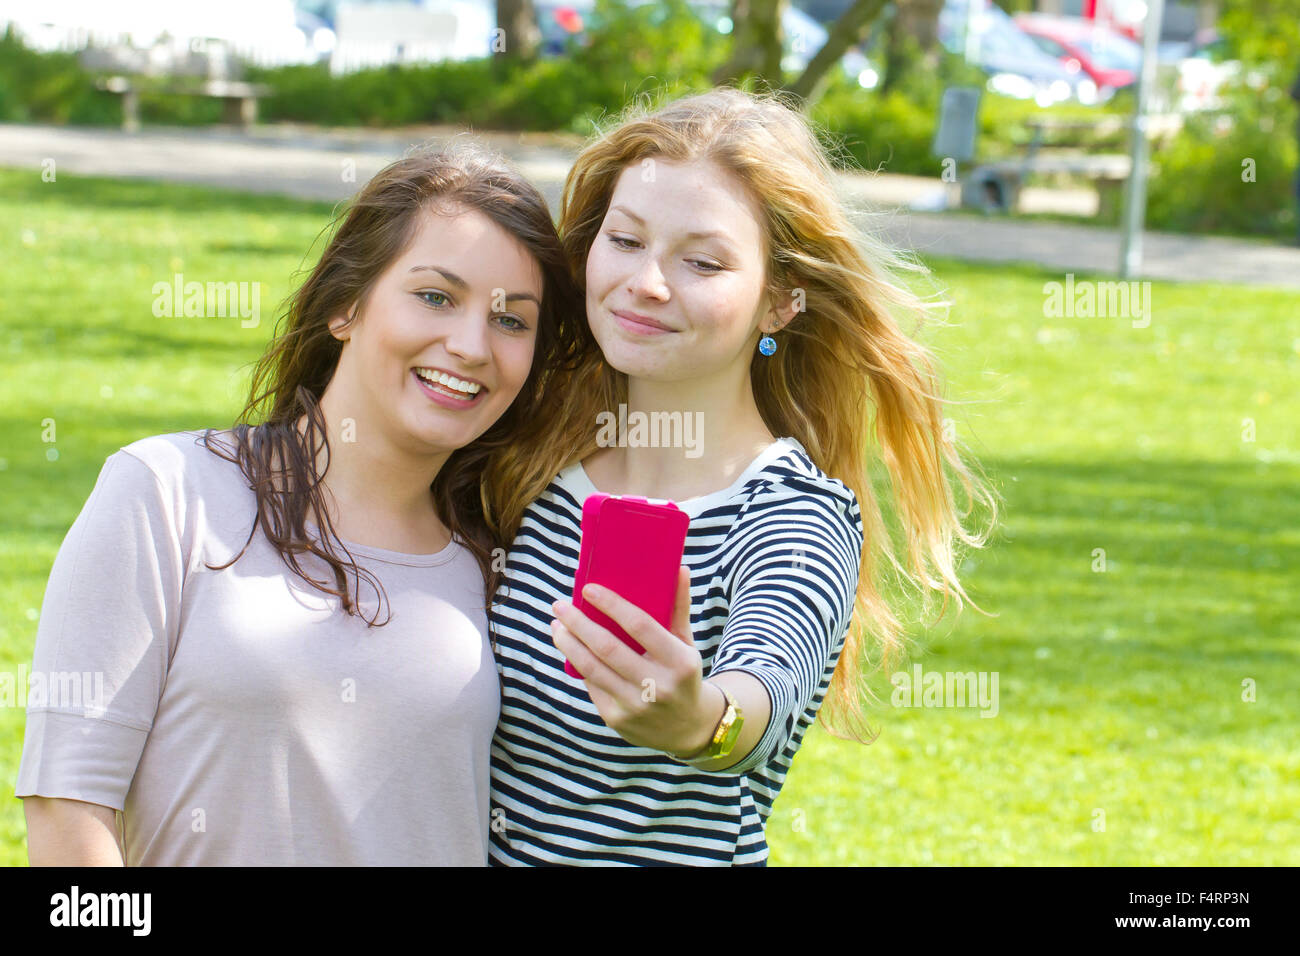 Taking Selfie with Smartphone Stock Photo